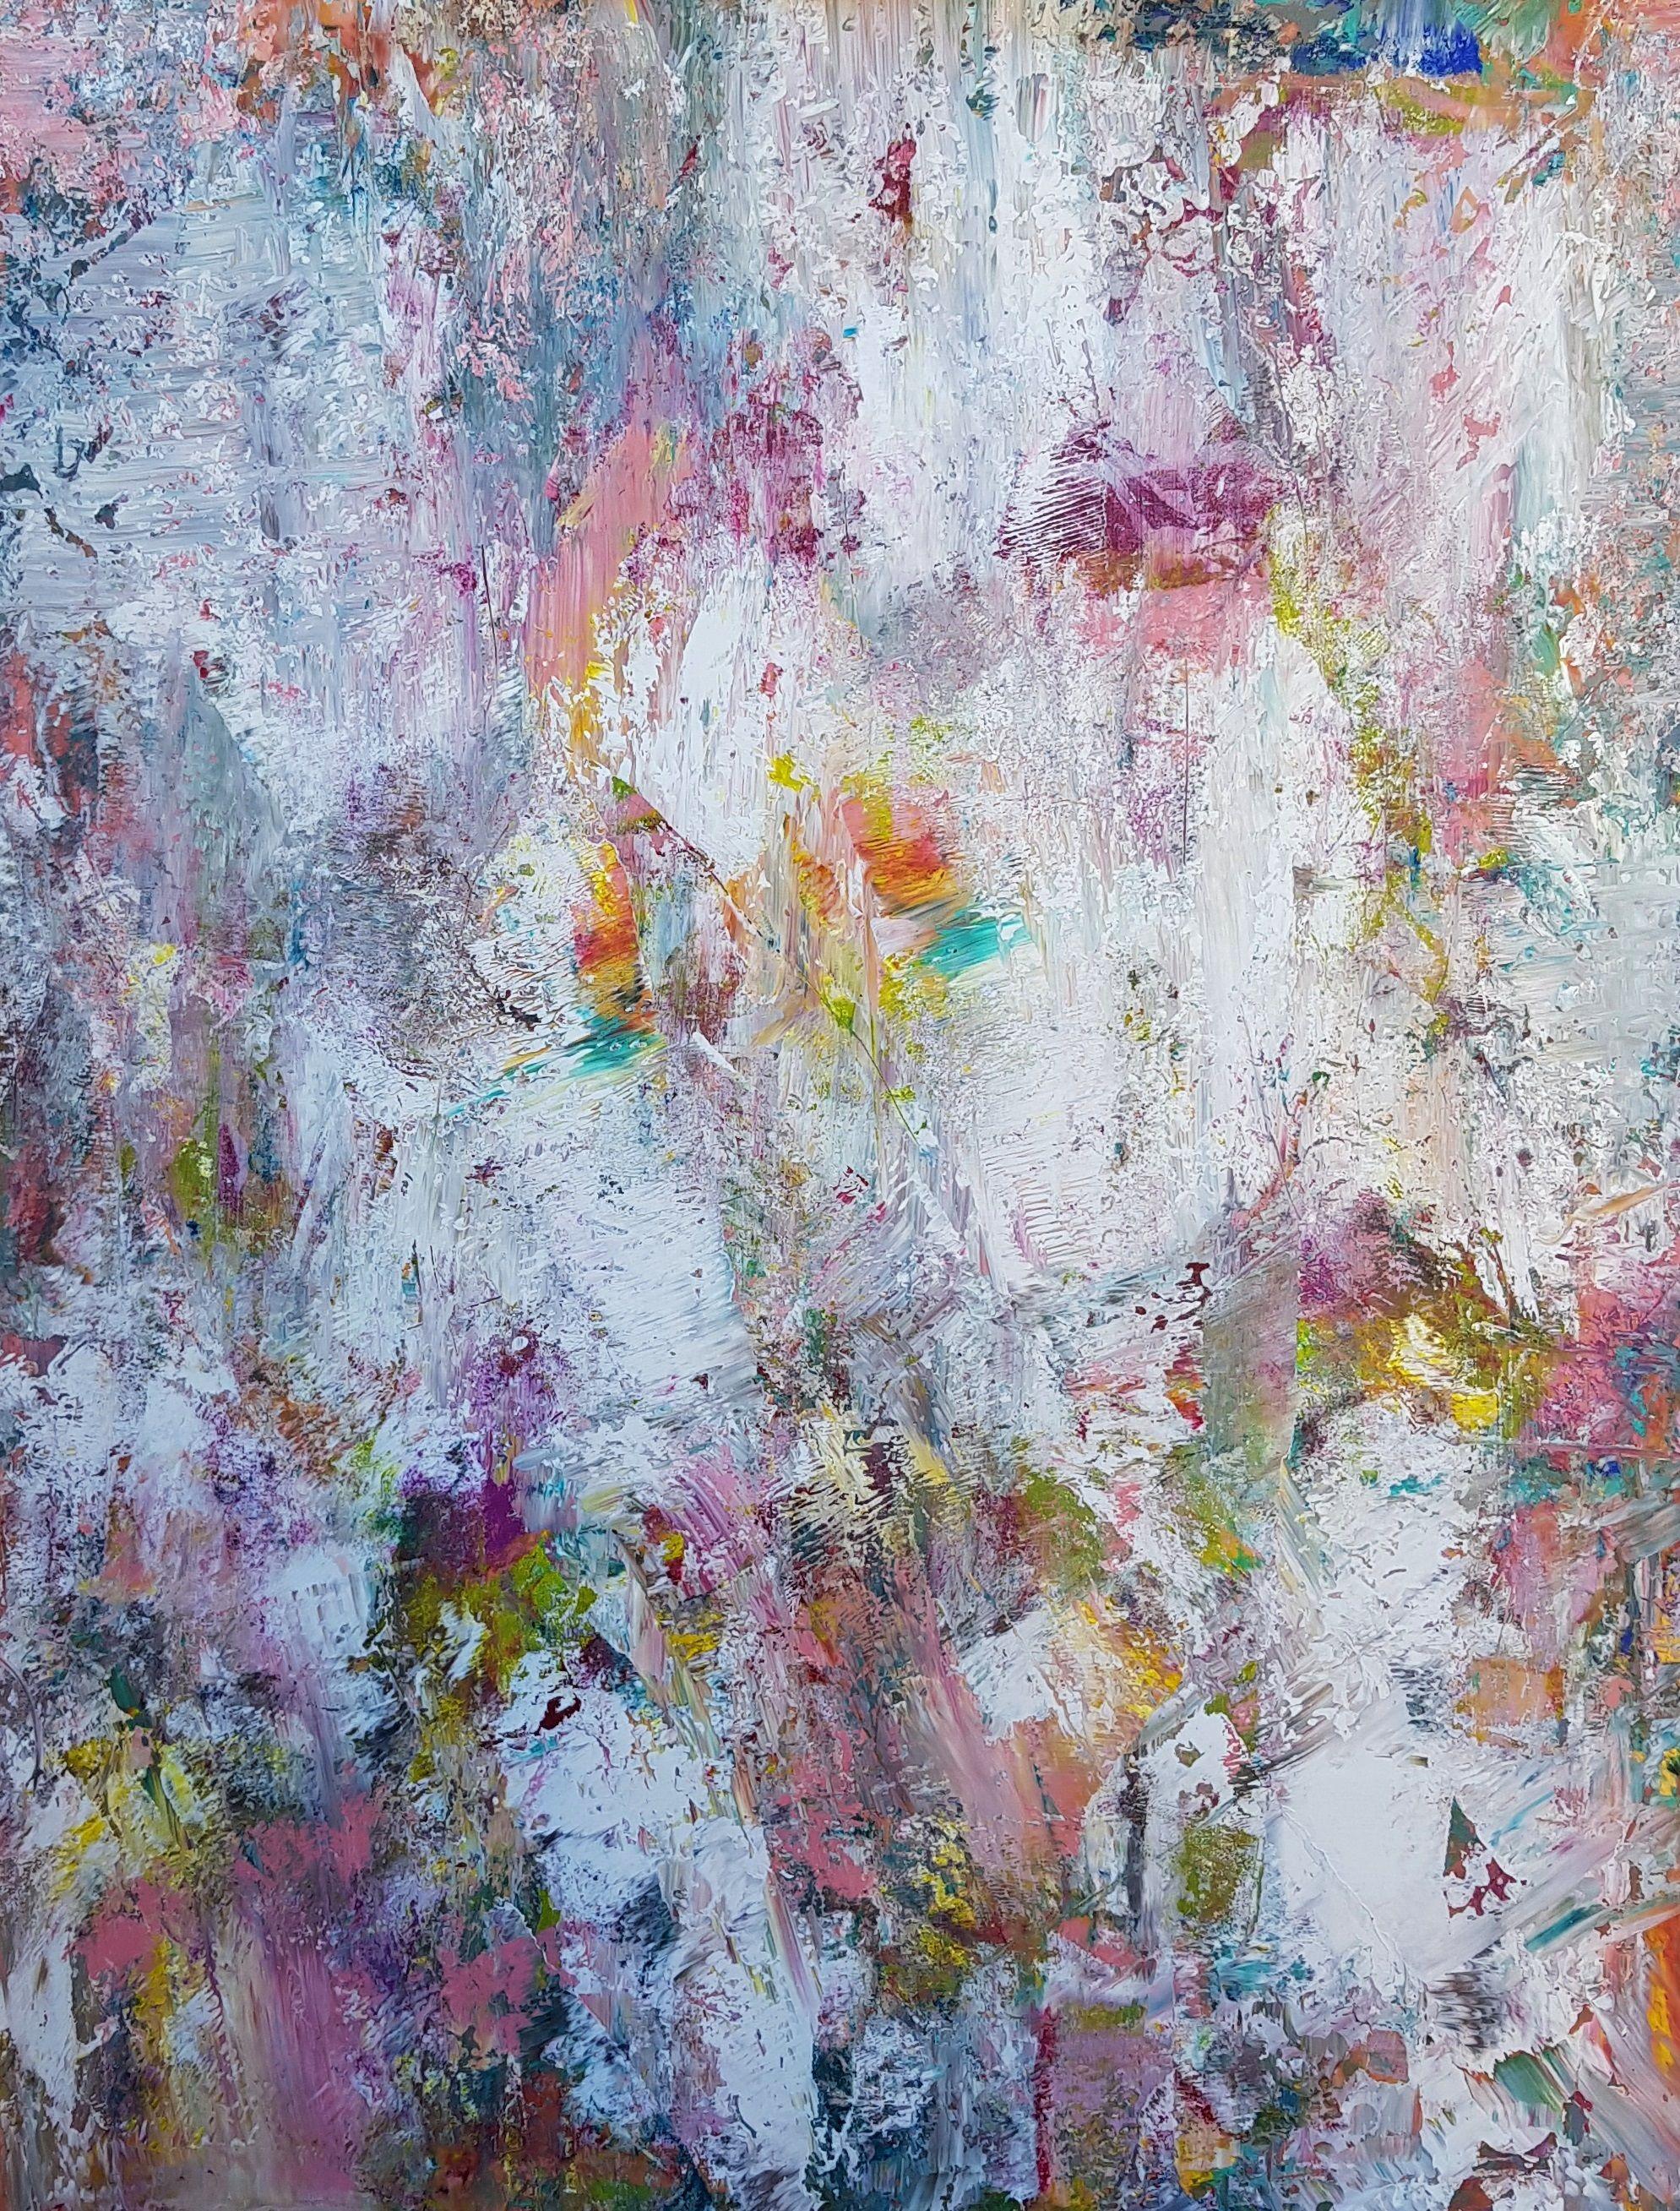   An original one-of-a-kind colorful abstract painting with a gentle texture.  Inspired by summer landscapes, meadows, flowers, long sunny days, night dance, and music.    Multiple layers of professional acrylics on stretched canvas.  Artist's